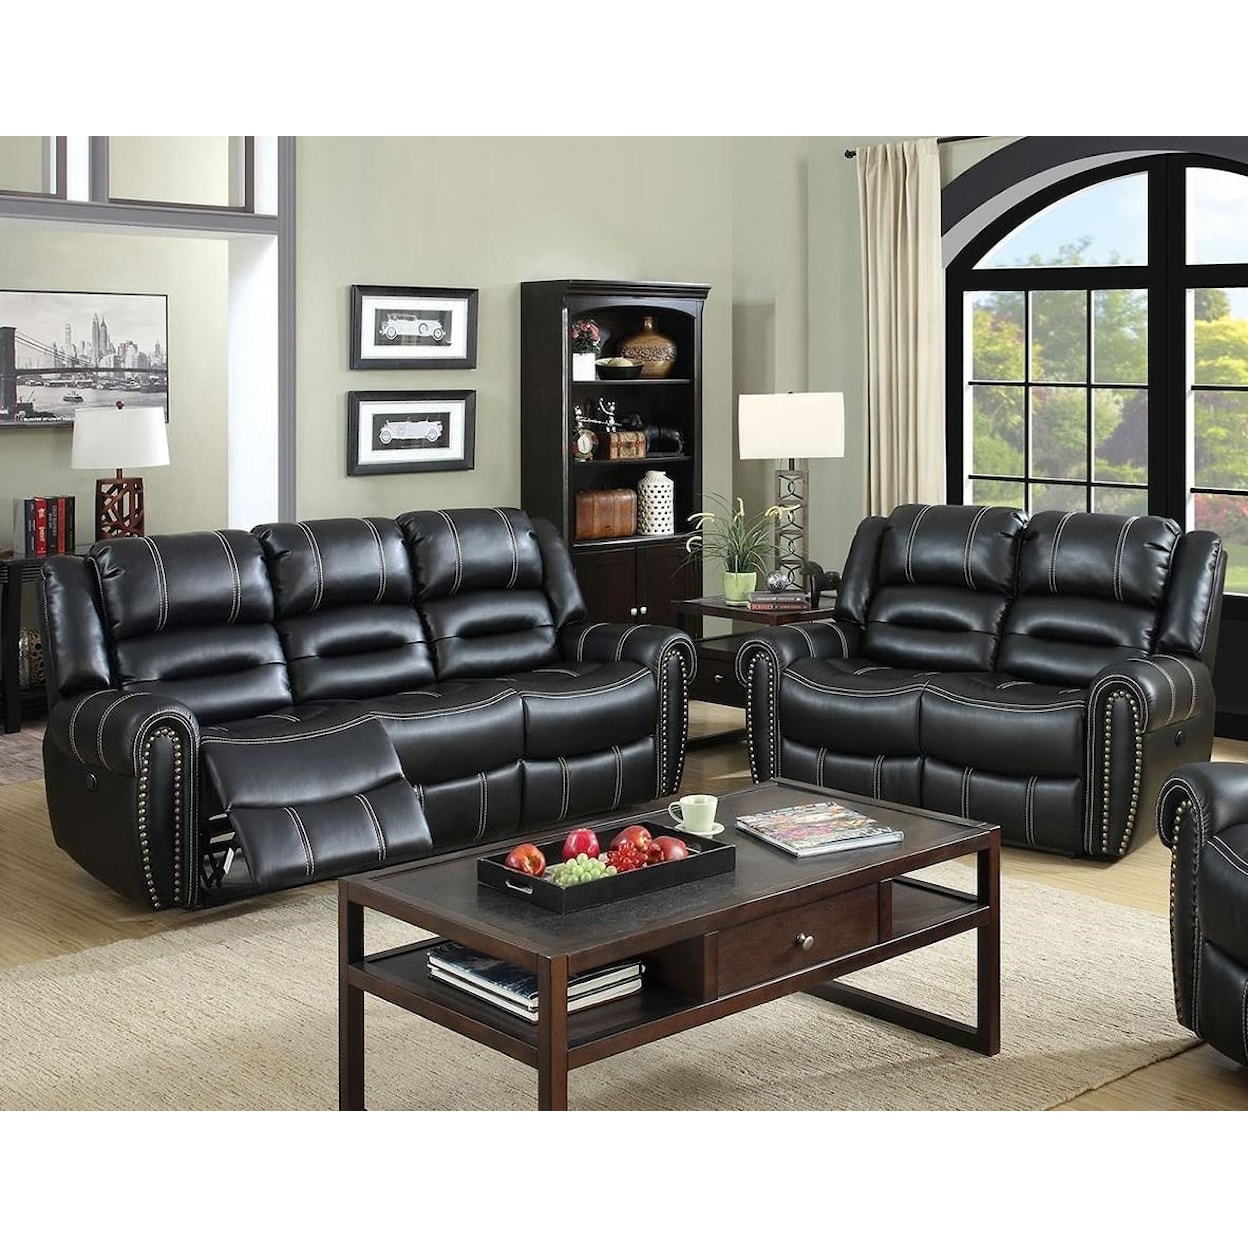 Furniture of America Frederick Reclining Living Room Group